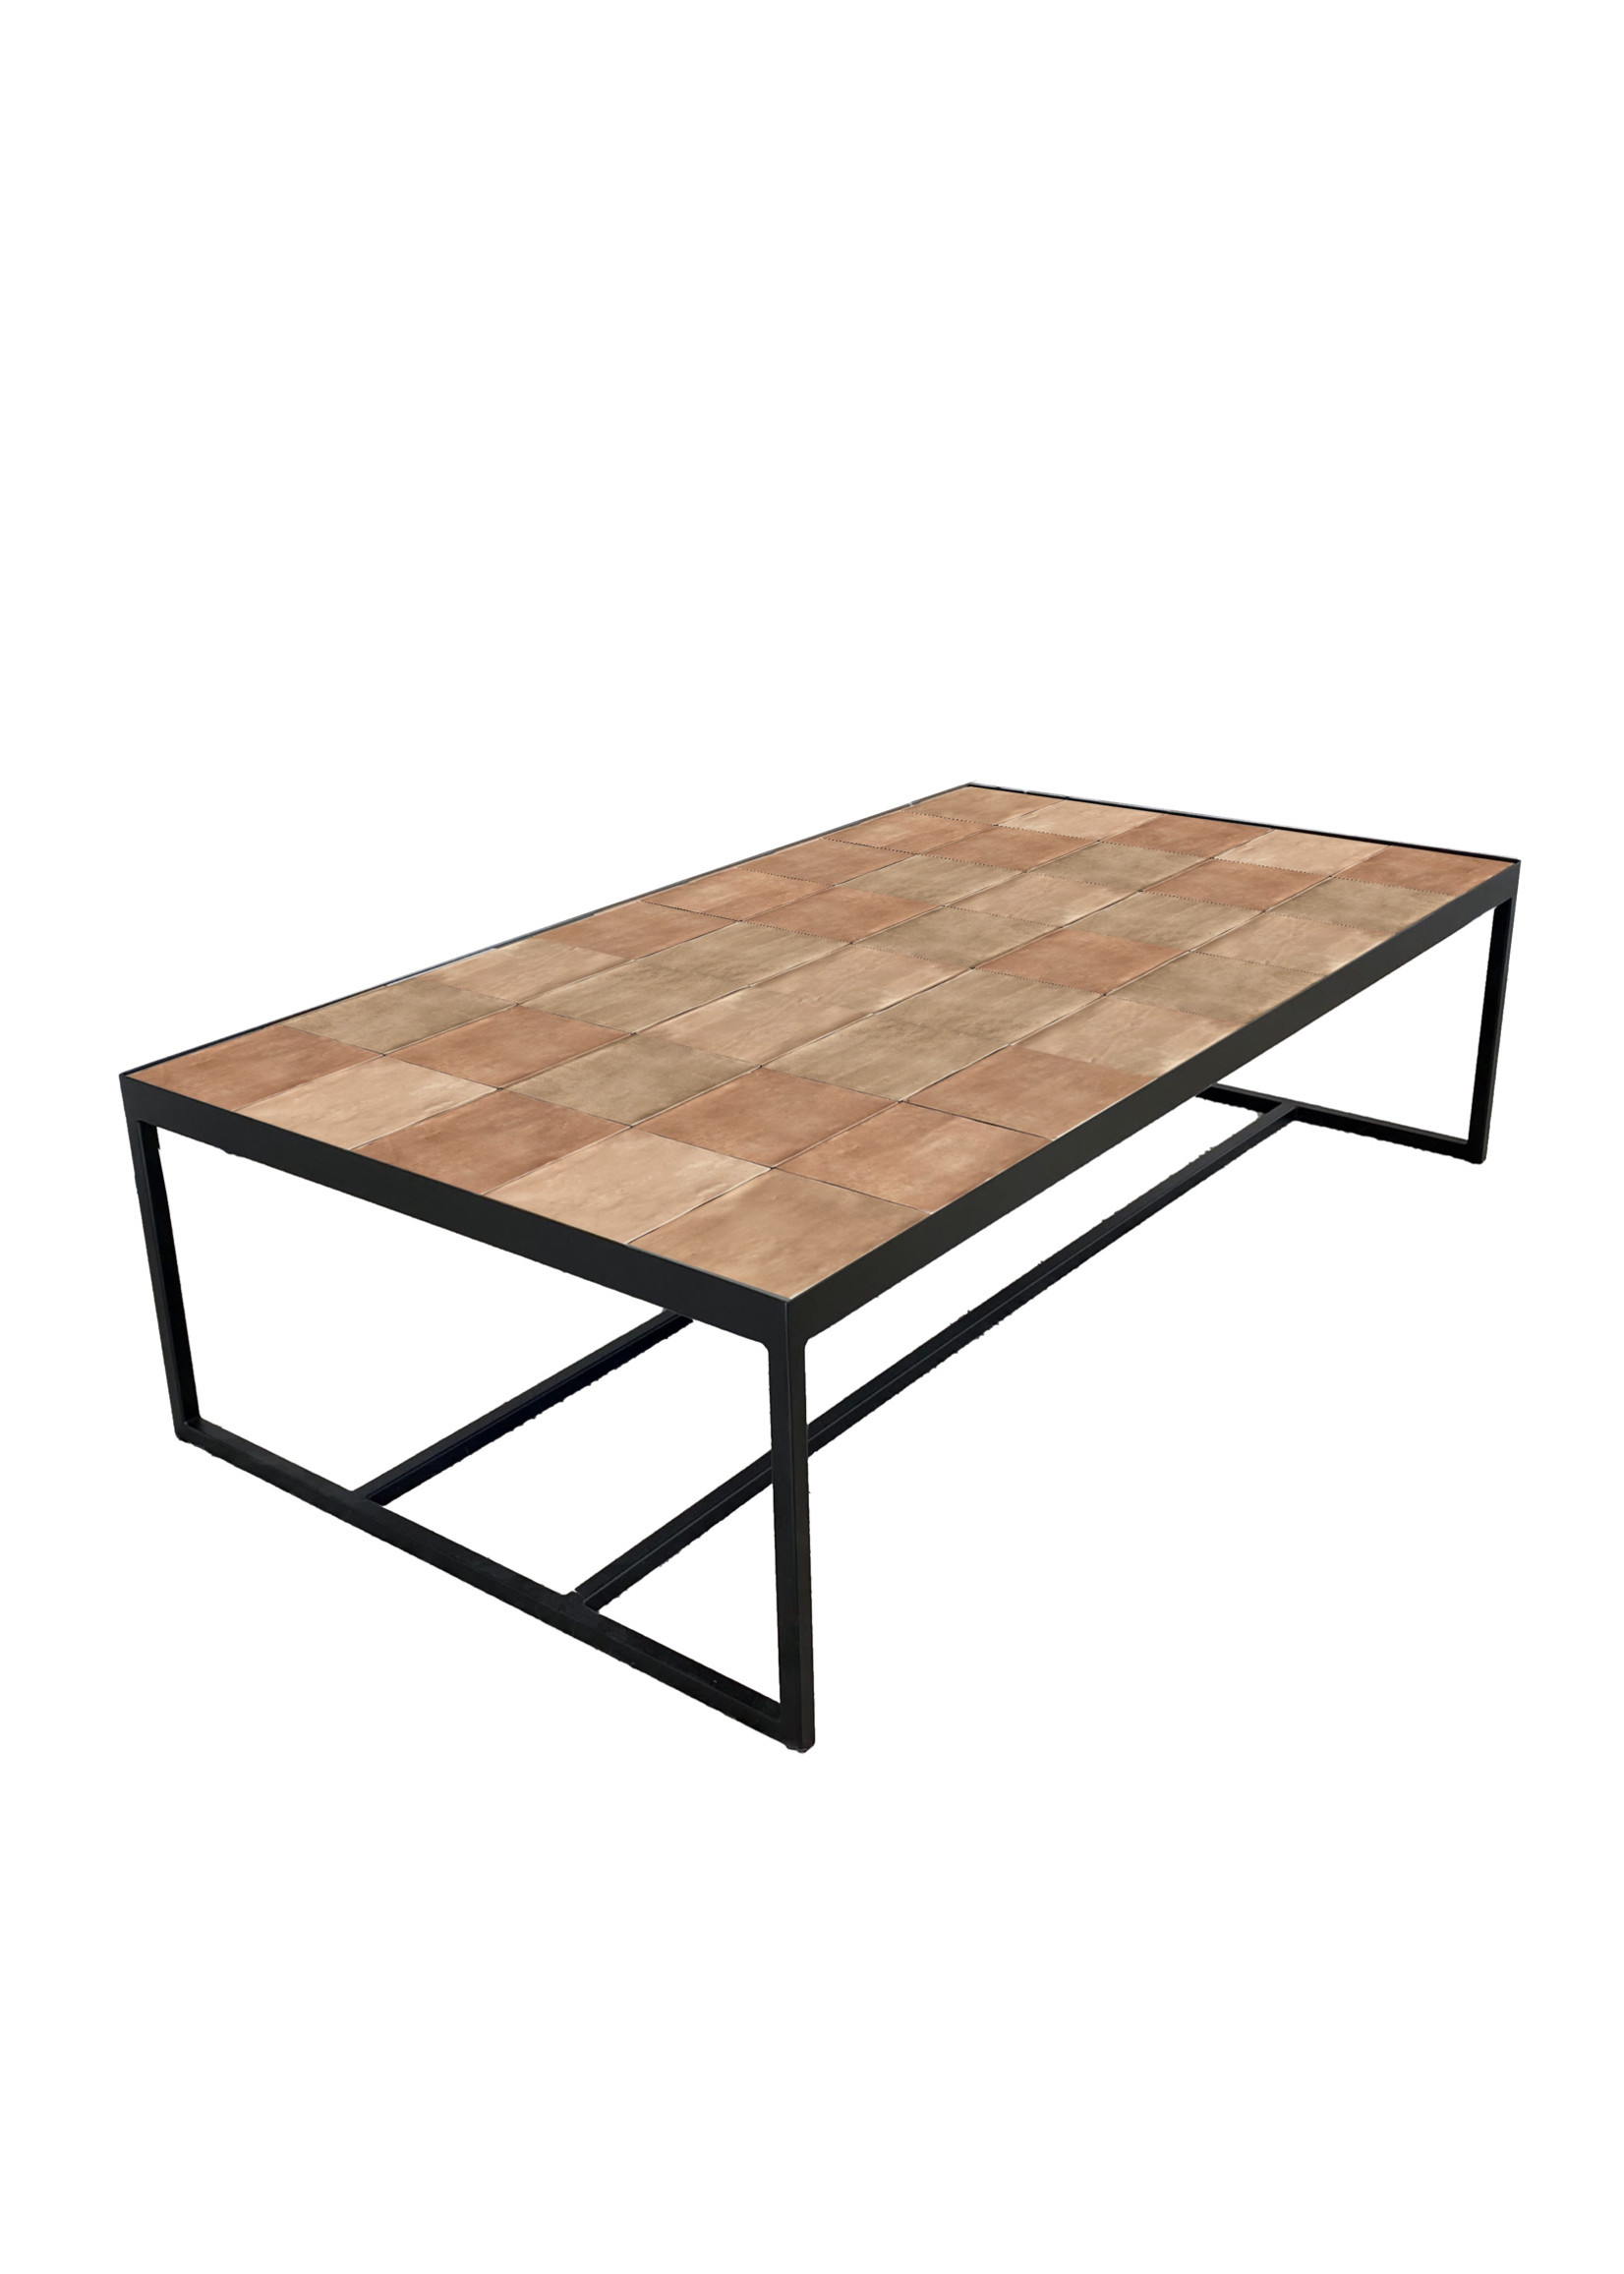 Meca Cotto Tiled Coffee Table